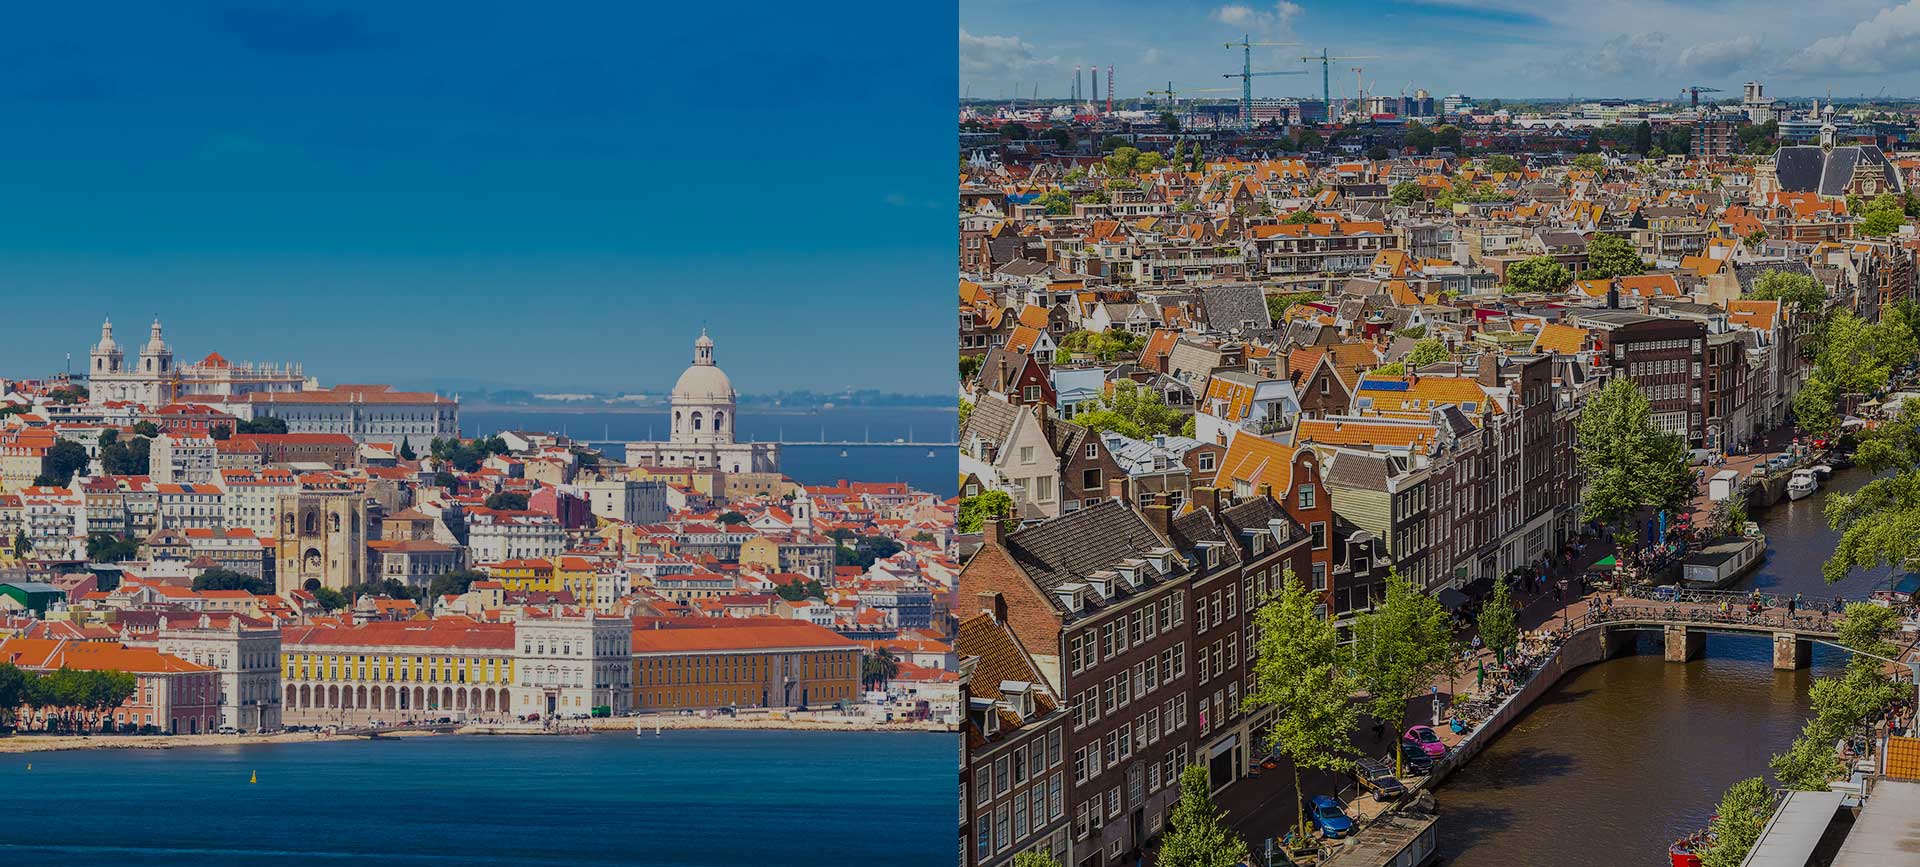 Work in Netherlands or work in Portugal?